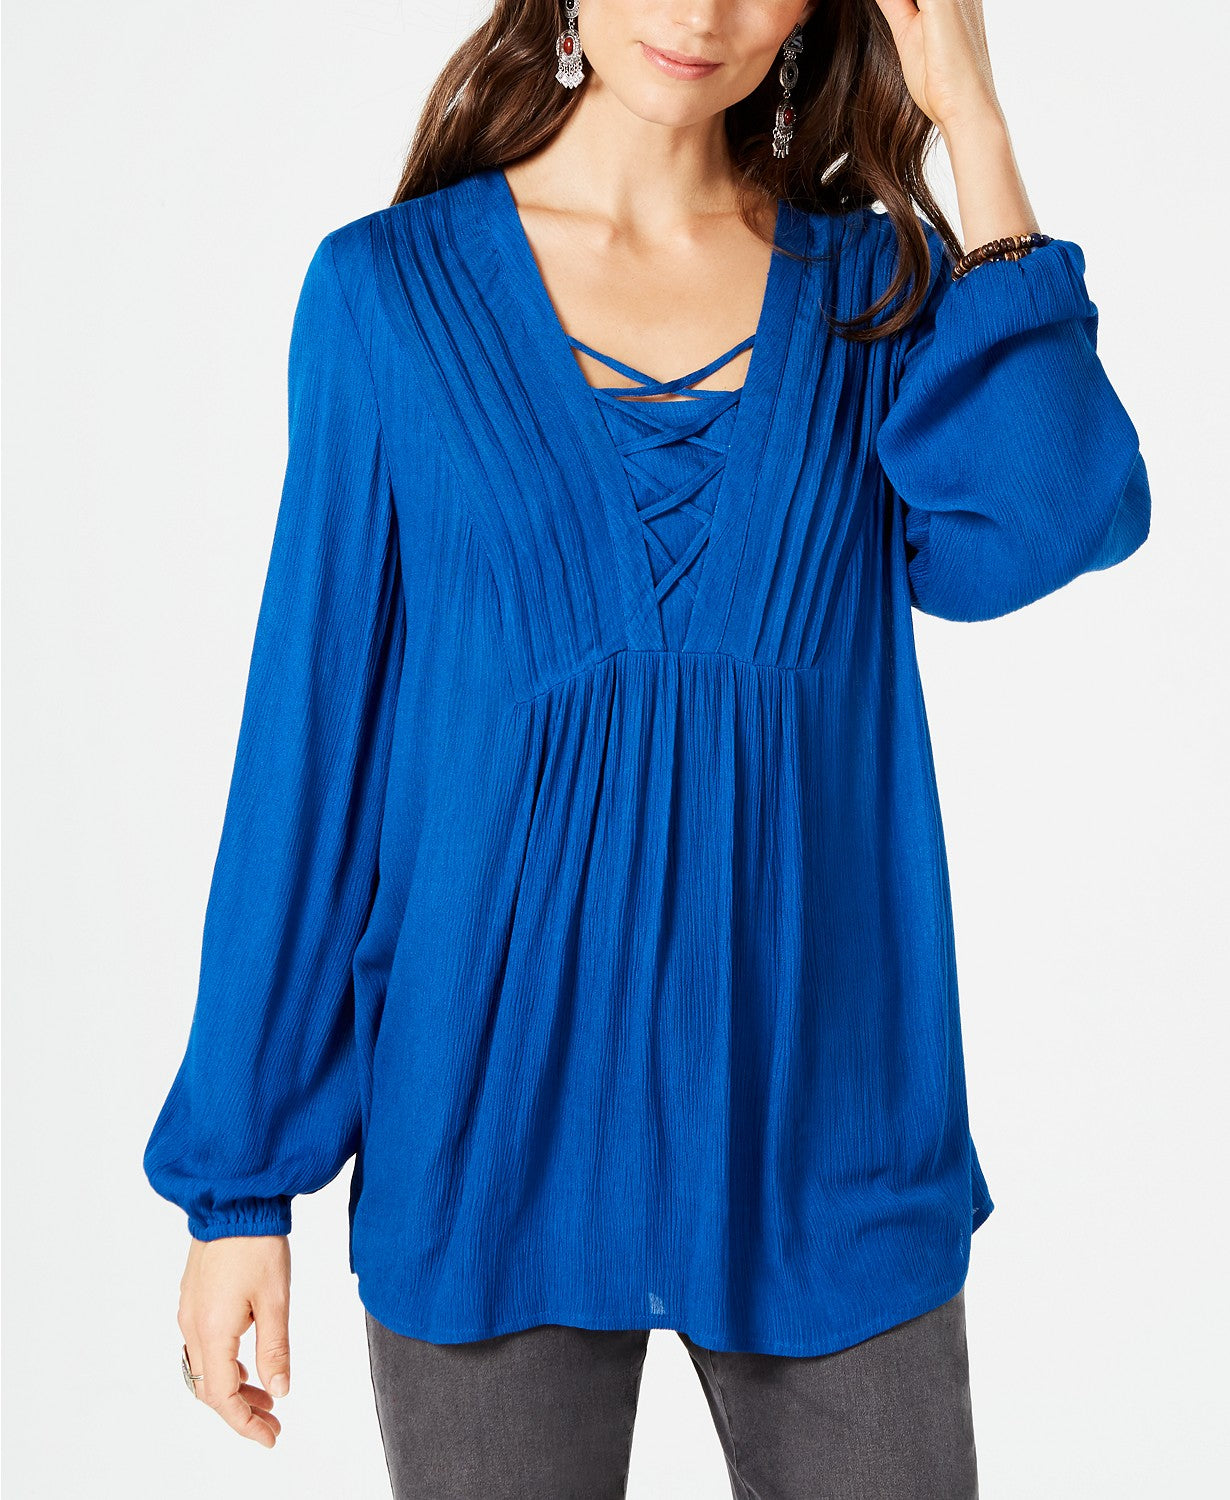 Style & Co Solid Laced Up Vneck Top Navy S